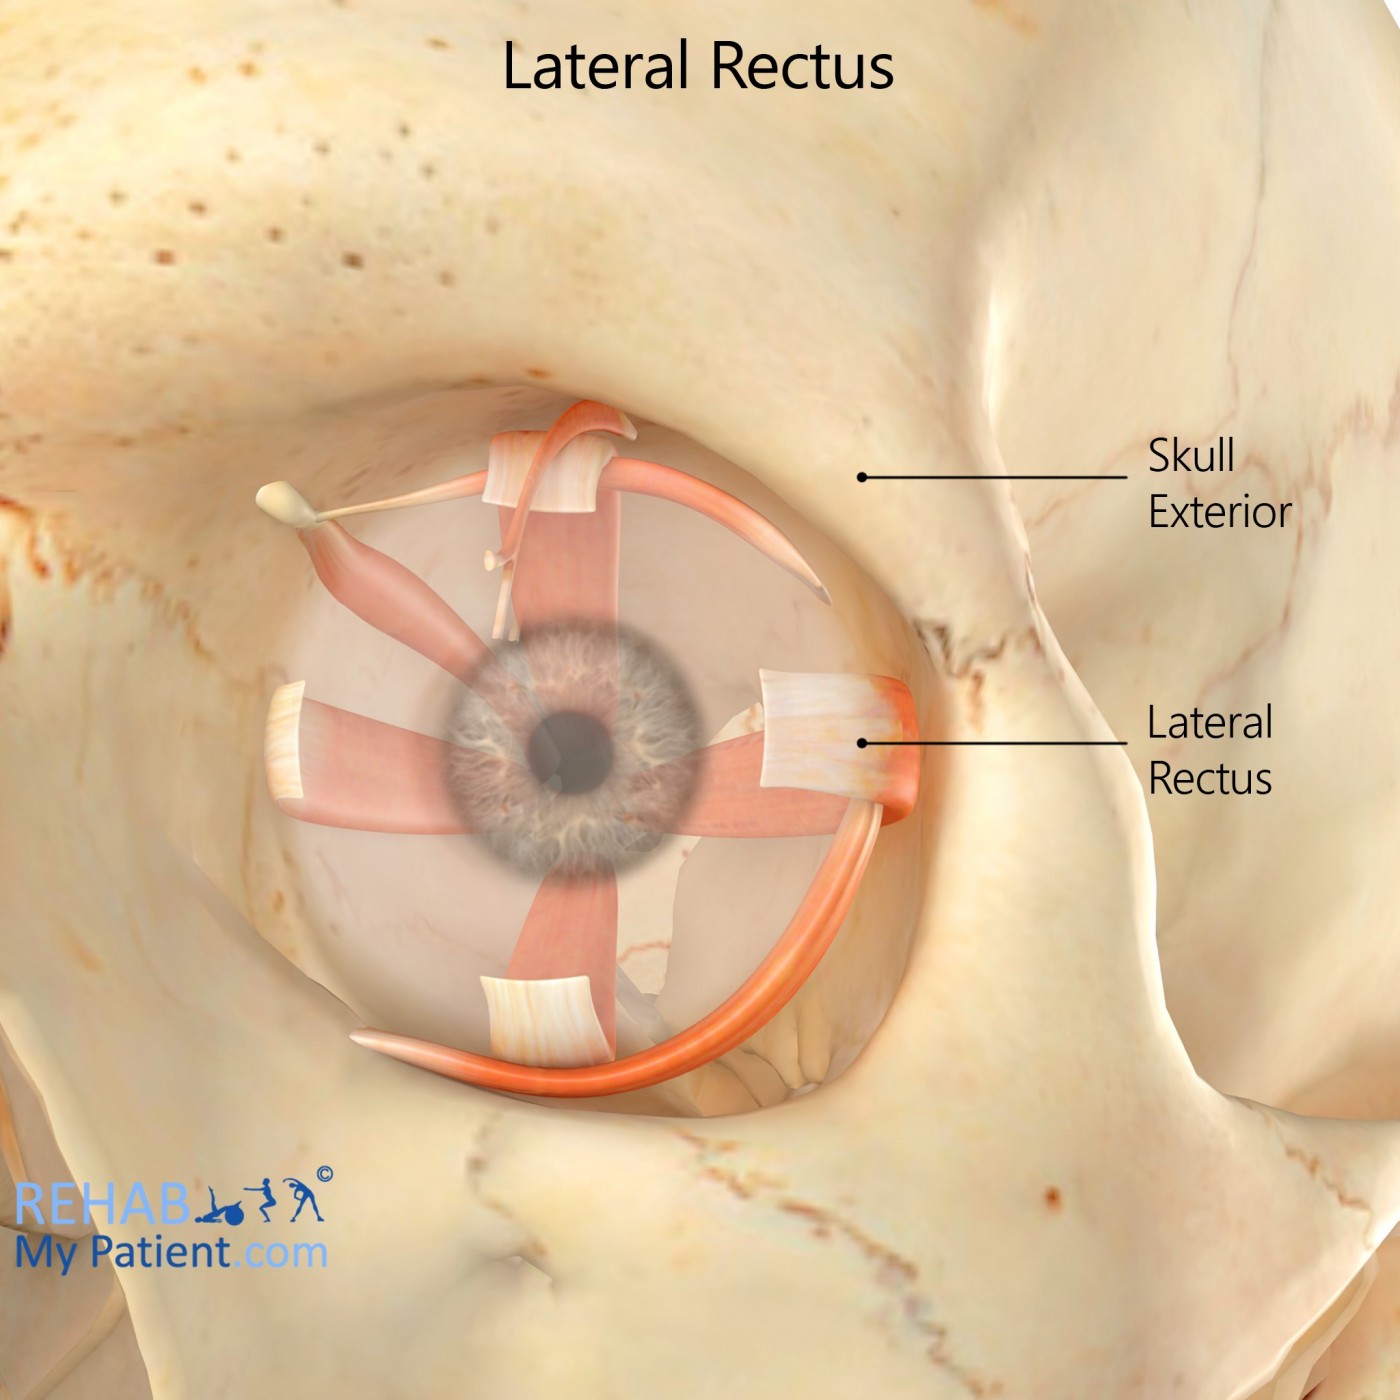 Lateral Rectus